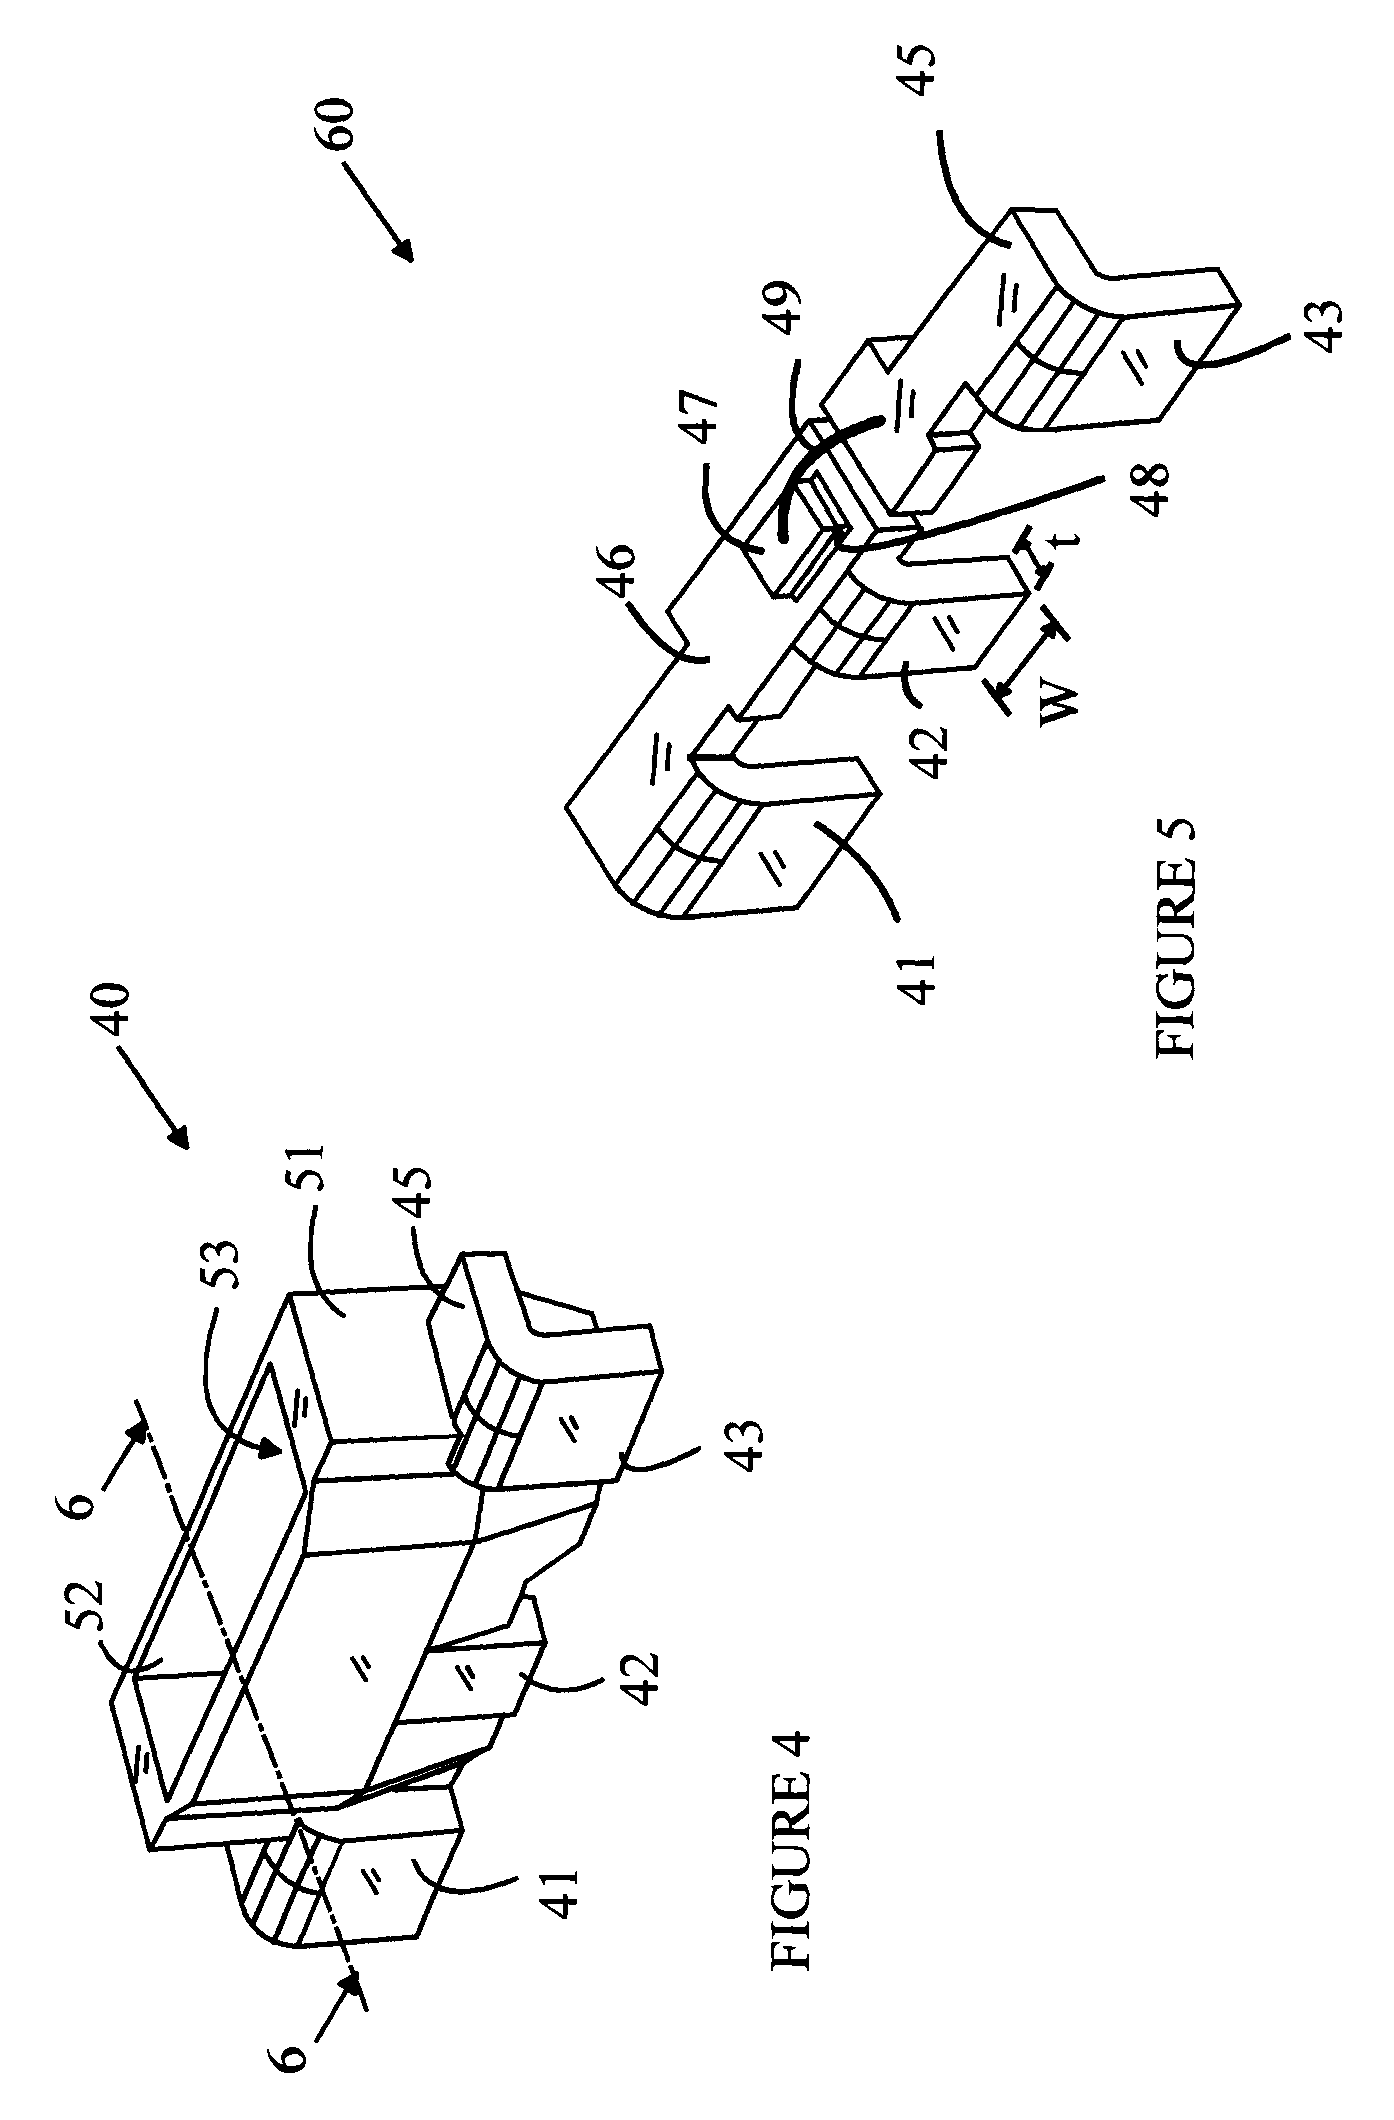 Side-emitting LED package with improved heat dissipation